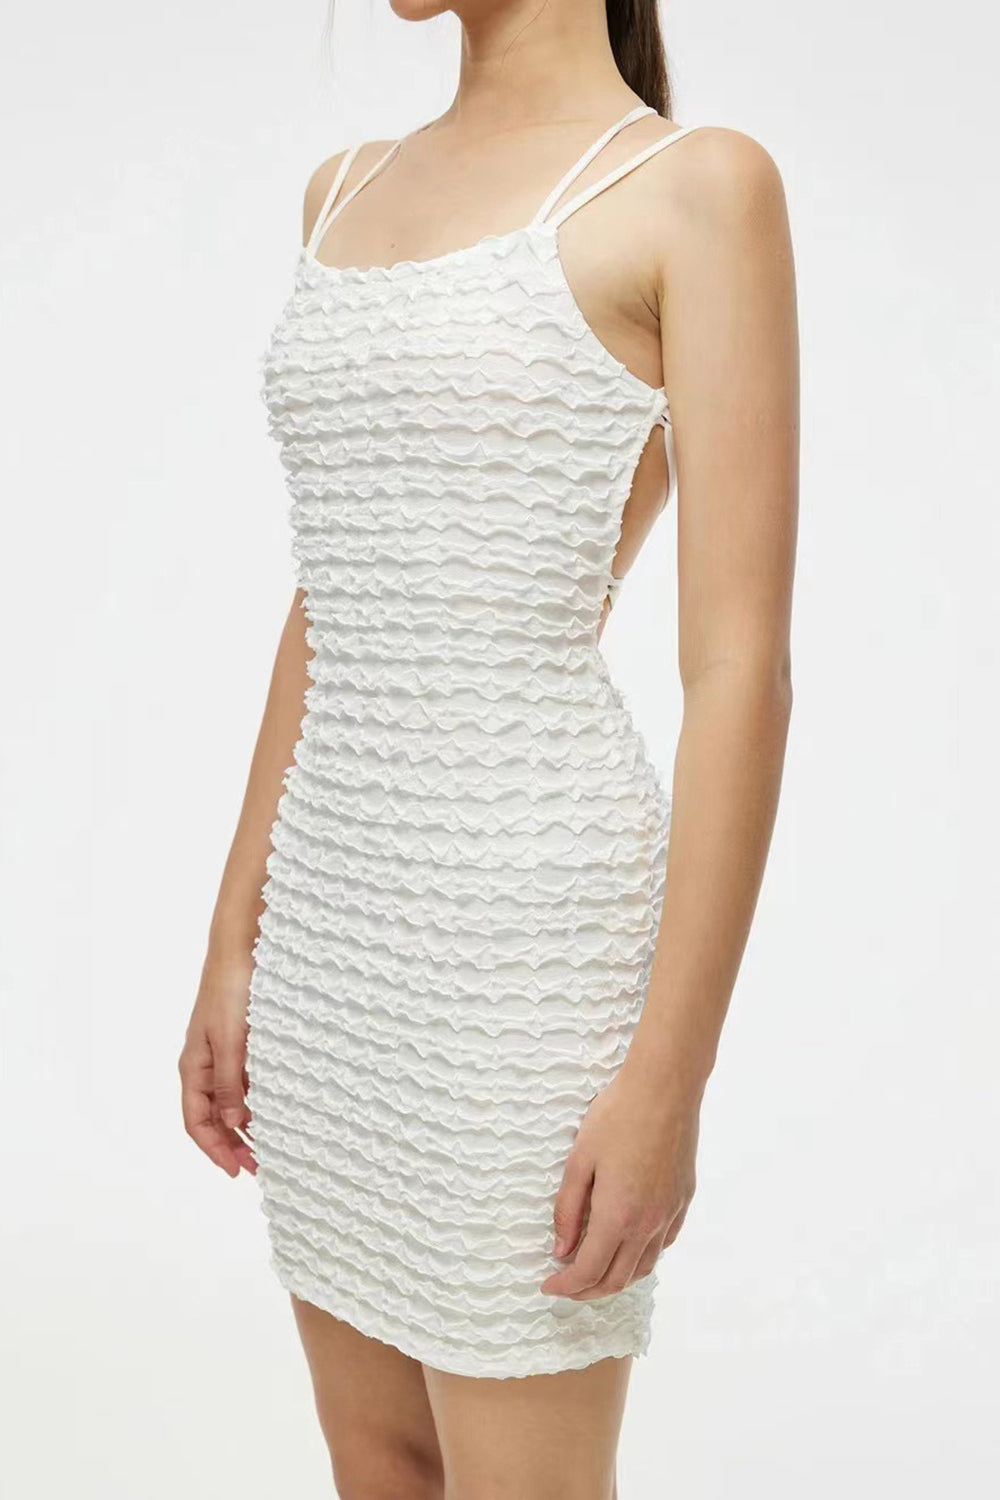 White Bodycon Graduation Dress With Lace-up Back